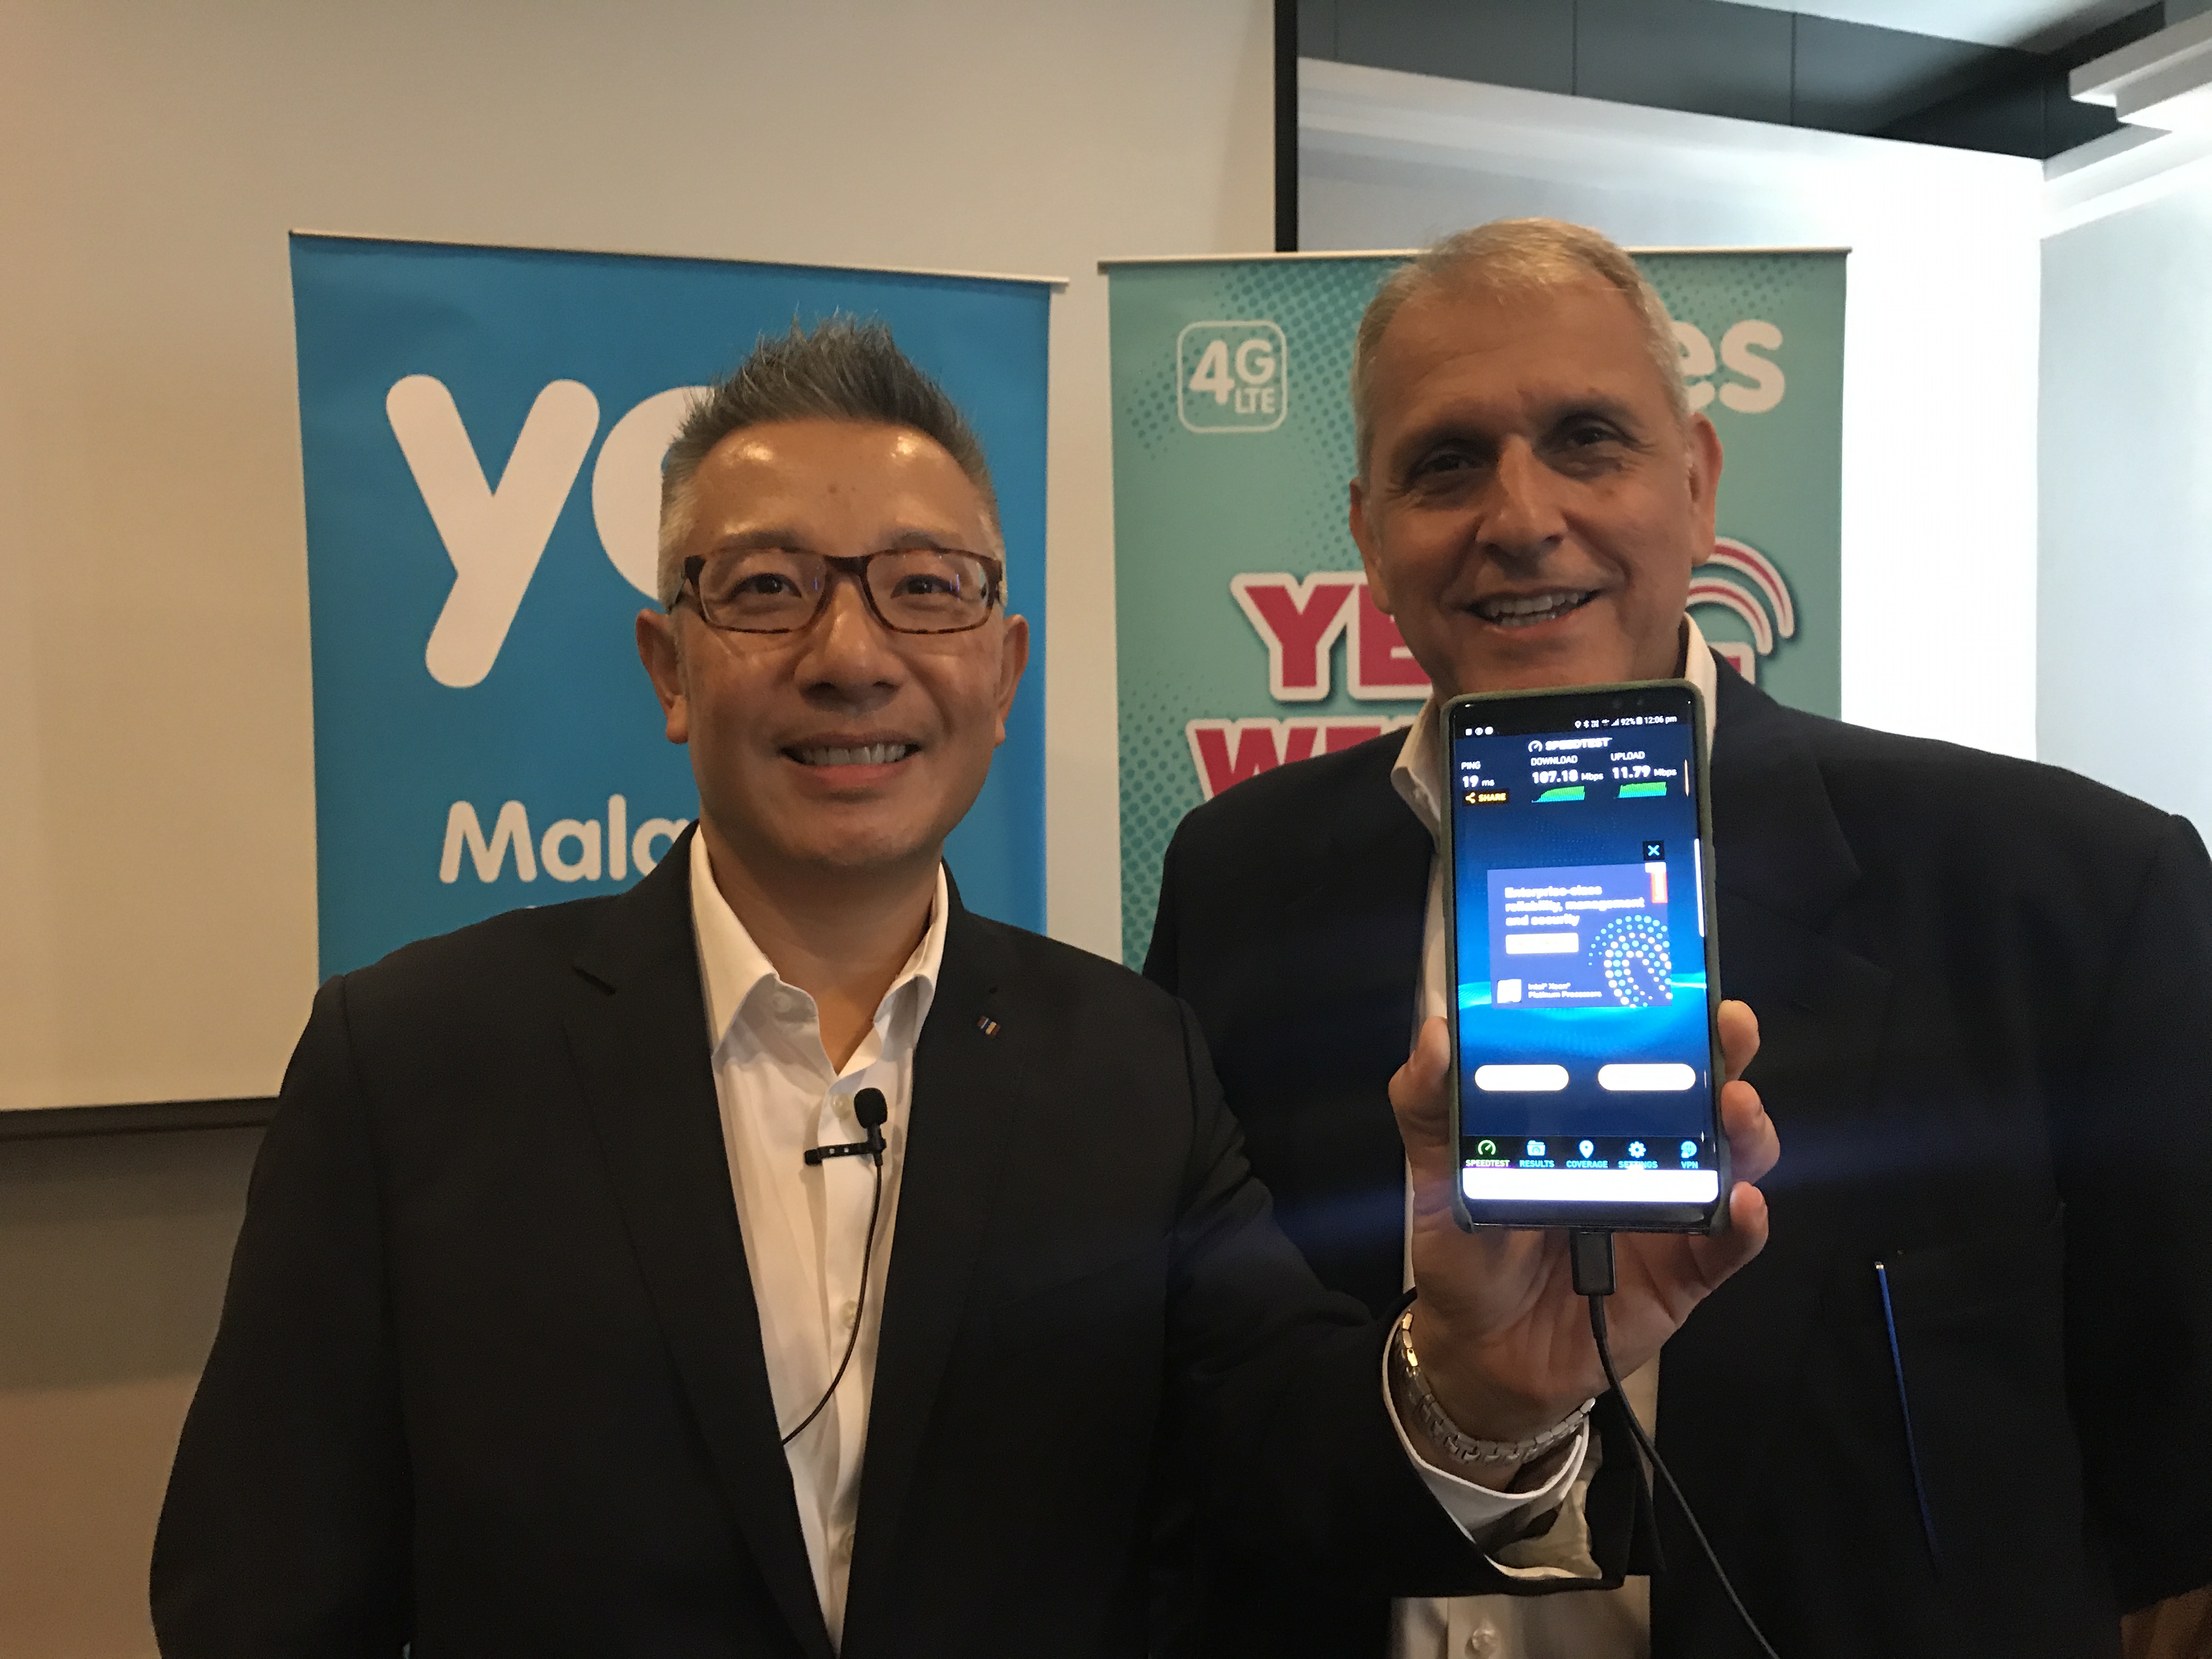 YES named the best 4G LTE speed and availability in Malaysia by OpenSignal